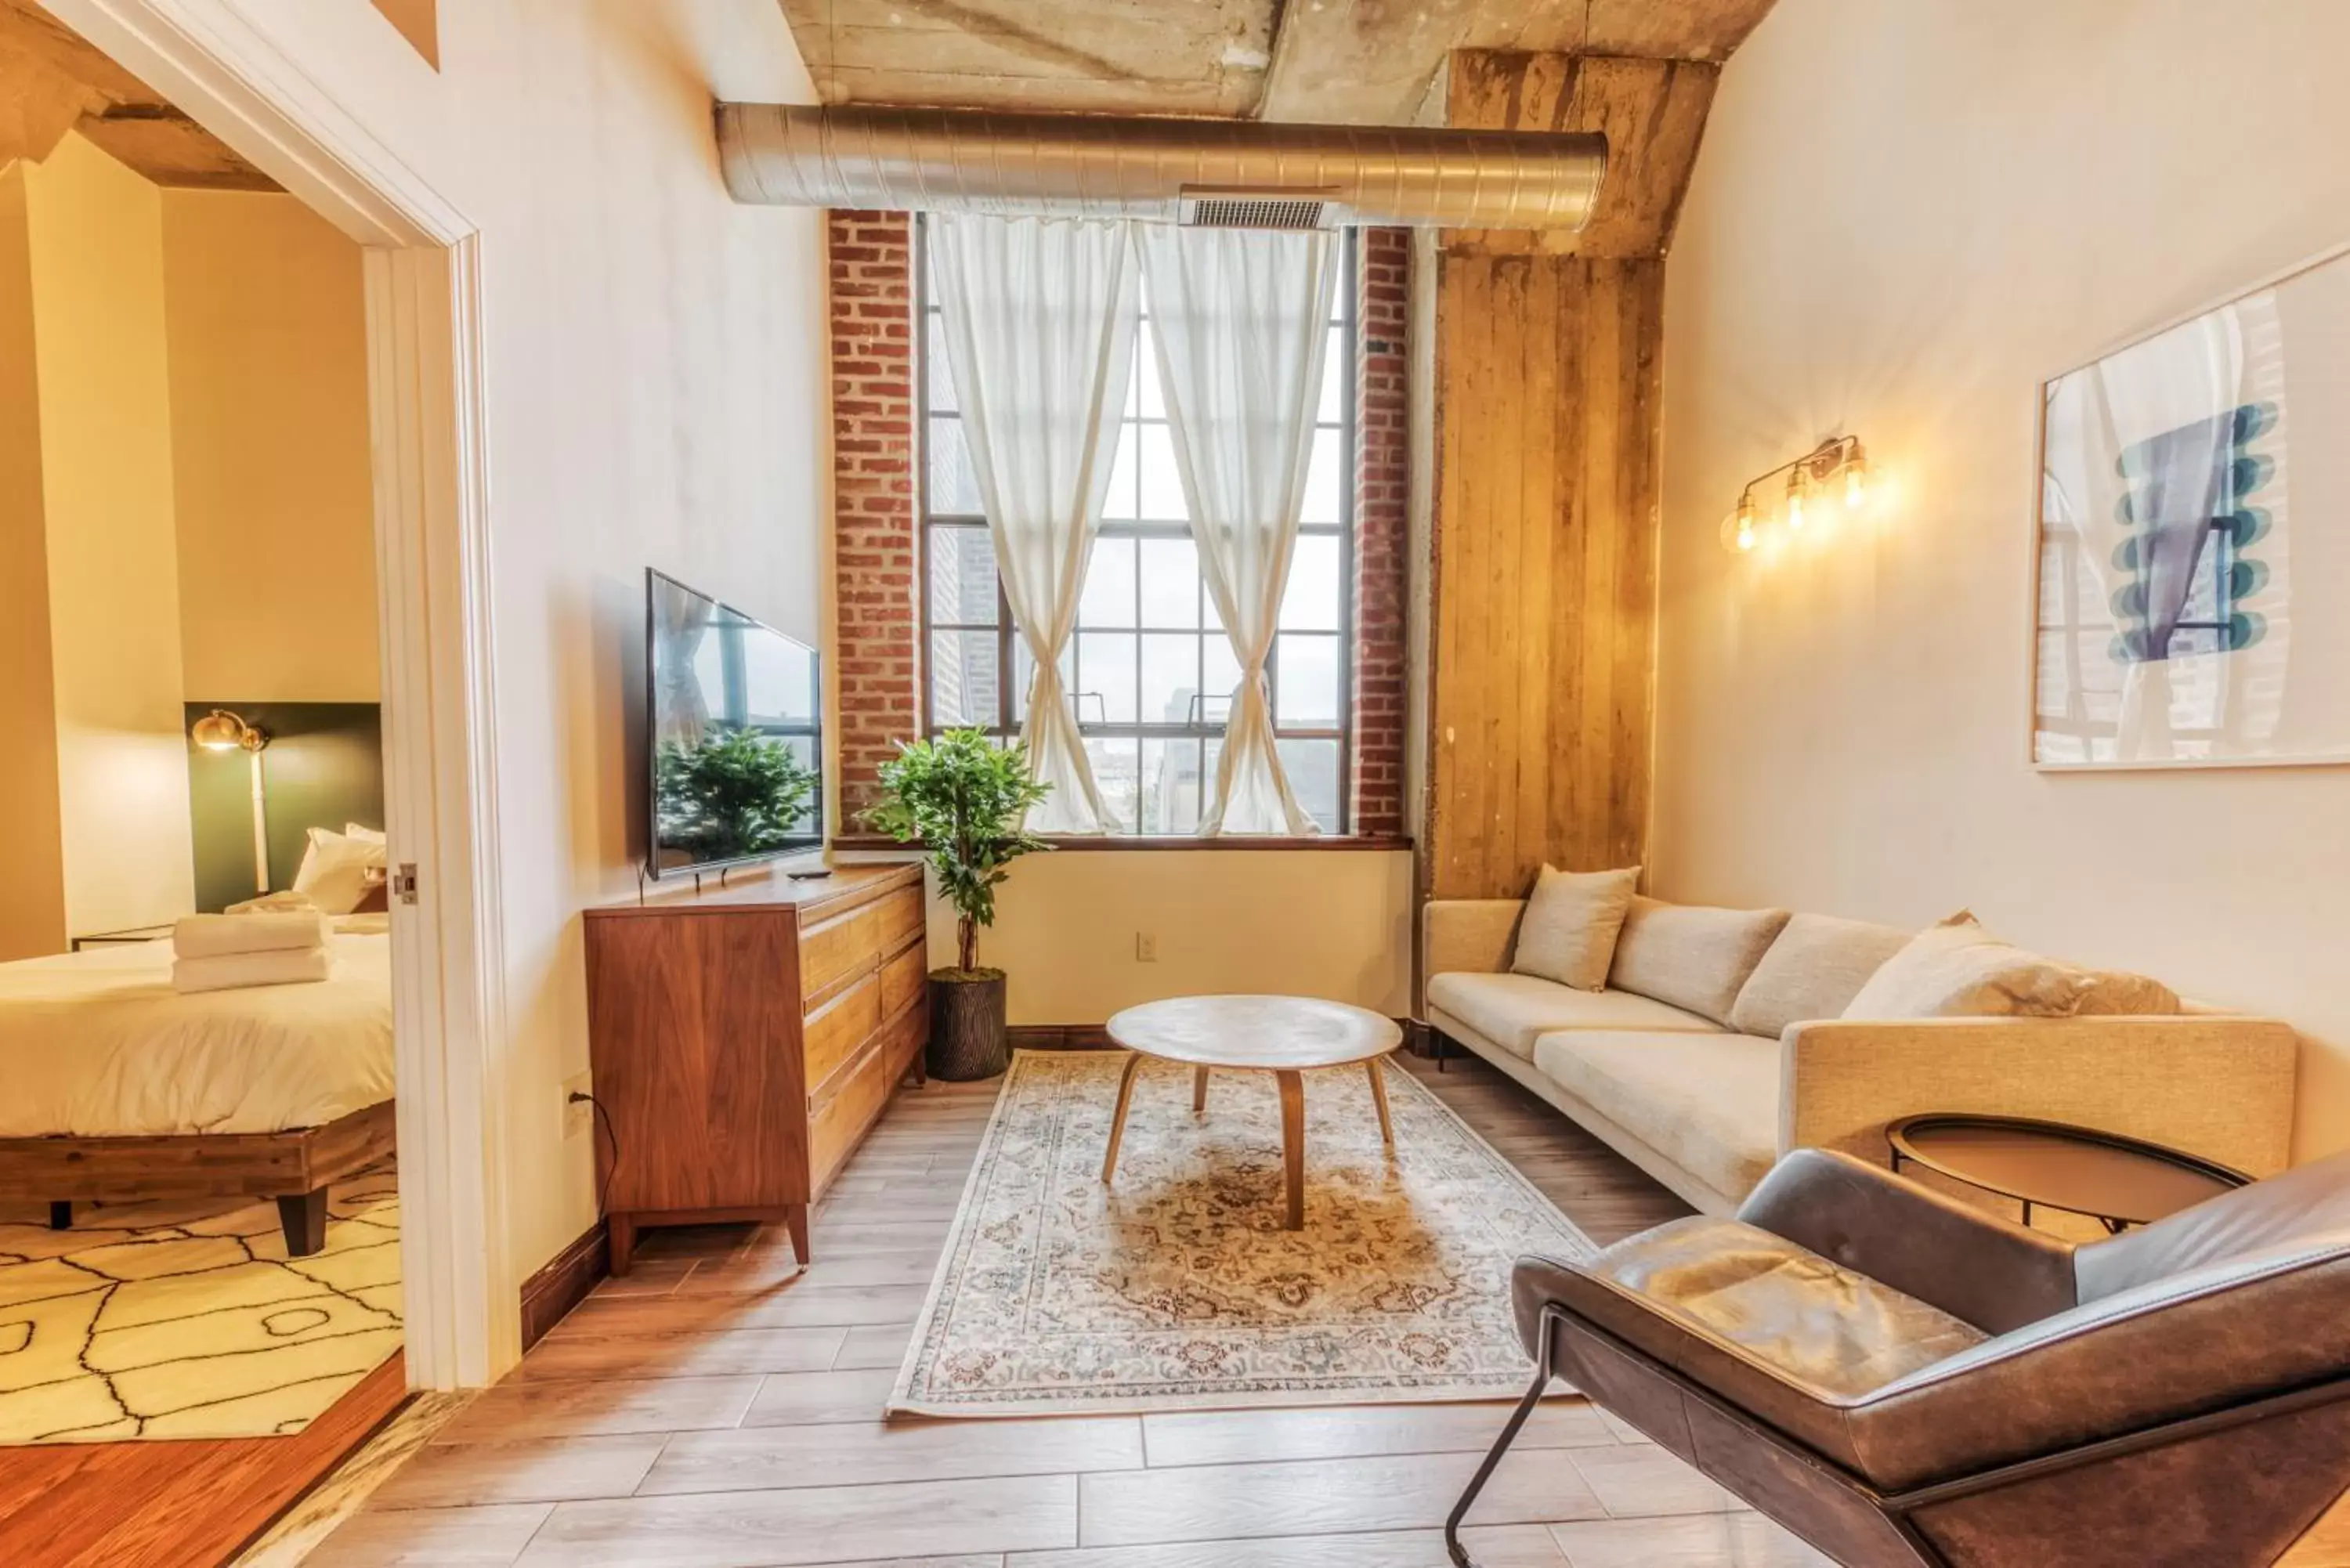 Apartment in Sosuite at Independence Lofts - Callowhill